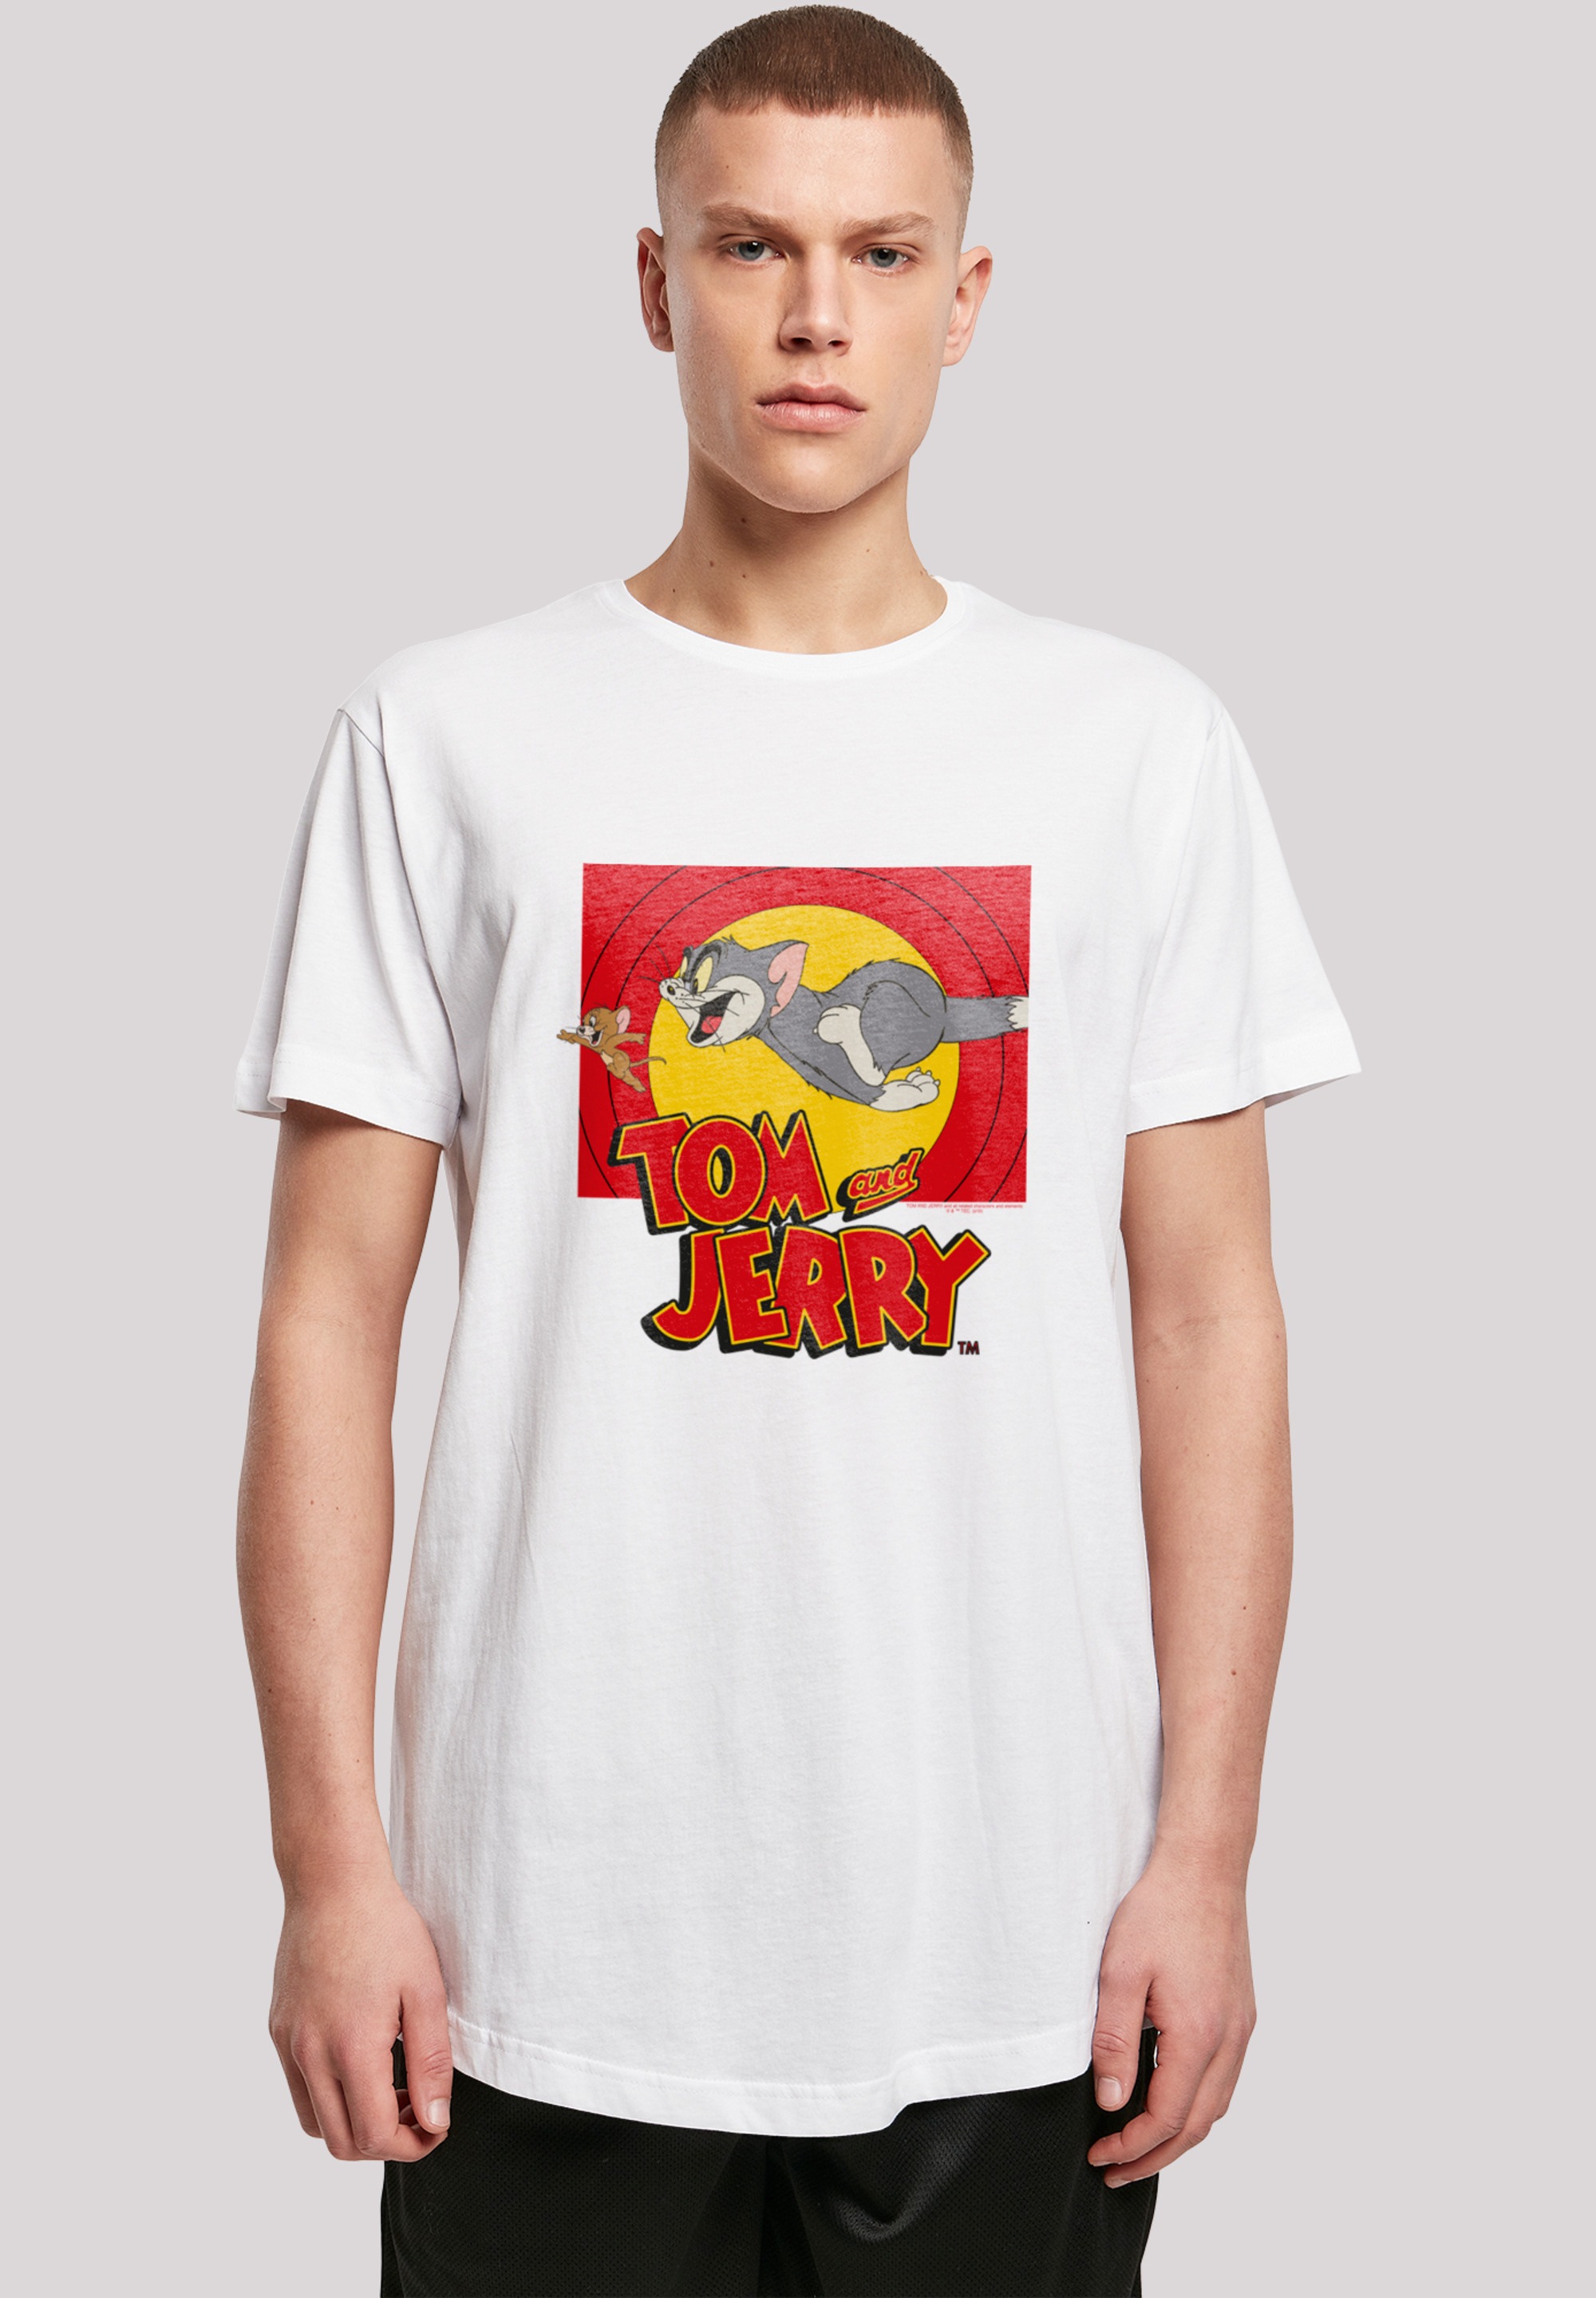 ▷ Jerry T-Shirt Serie Scene«, BAUR für | F4NT4STIC TV »Tom Print and Chase